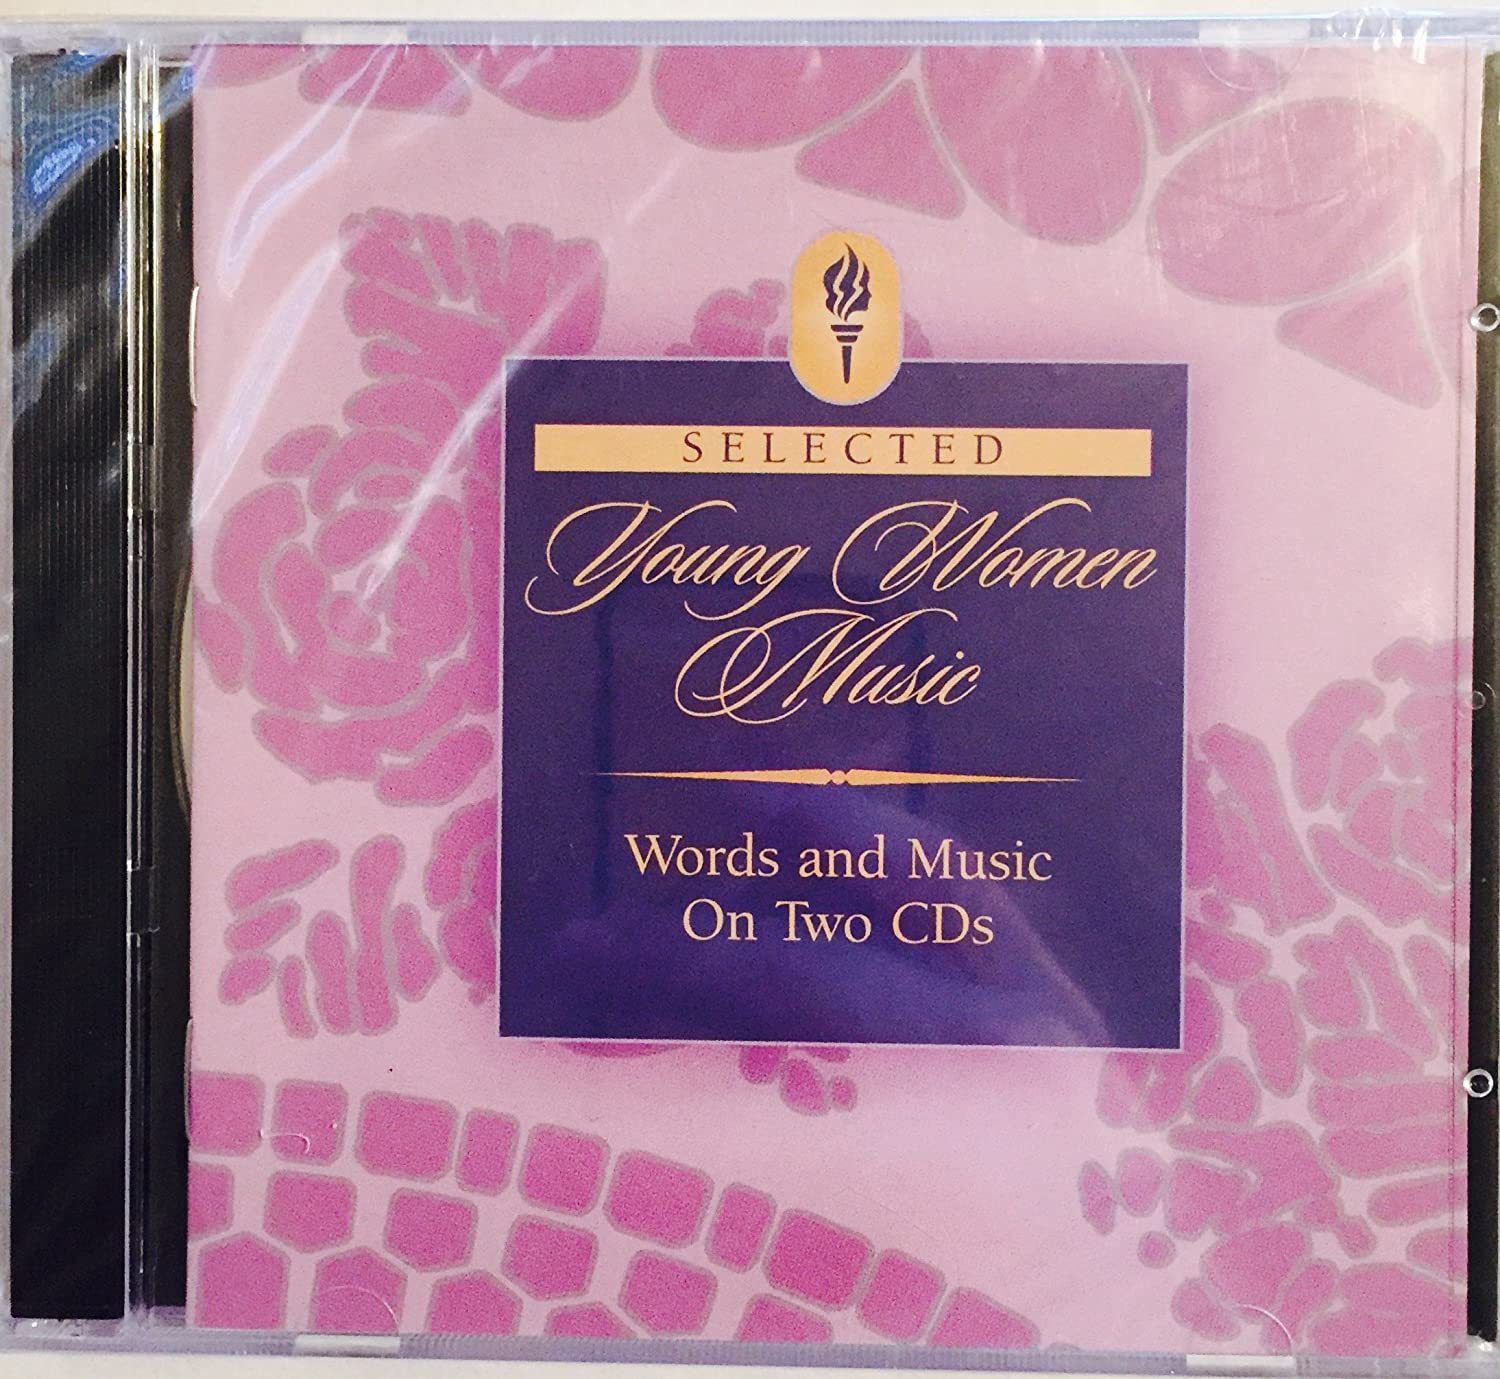 Selected Young Women Music (Audio CD, 402001580008) LDS